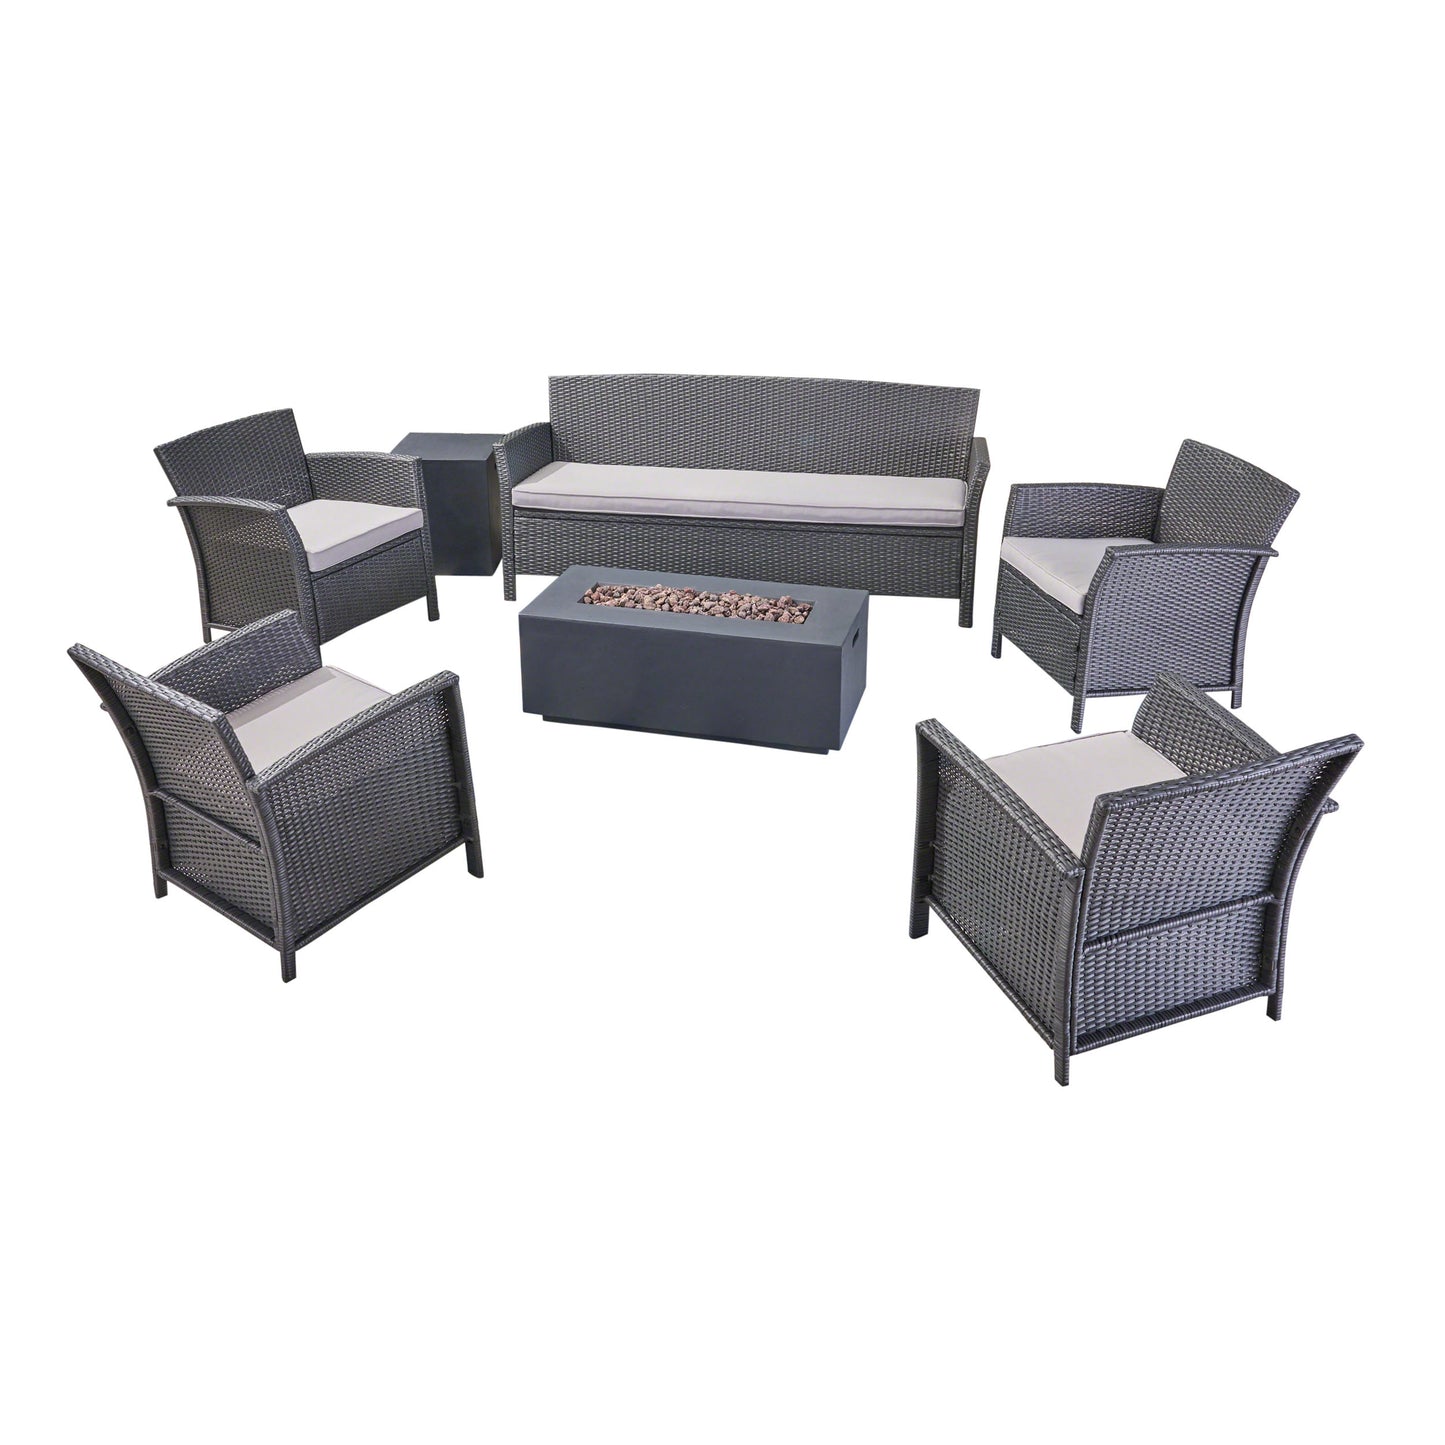 Mason Outdoor 7 Seater Wicker Chat Set with Fire Pit, Gray and Dark Gray